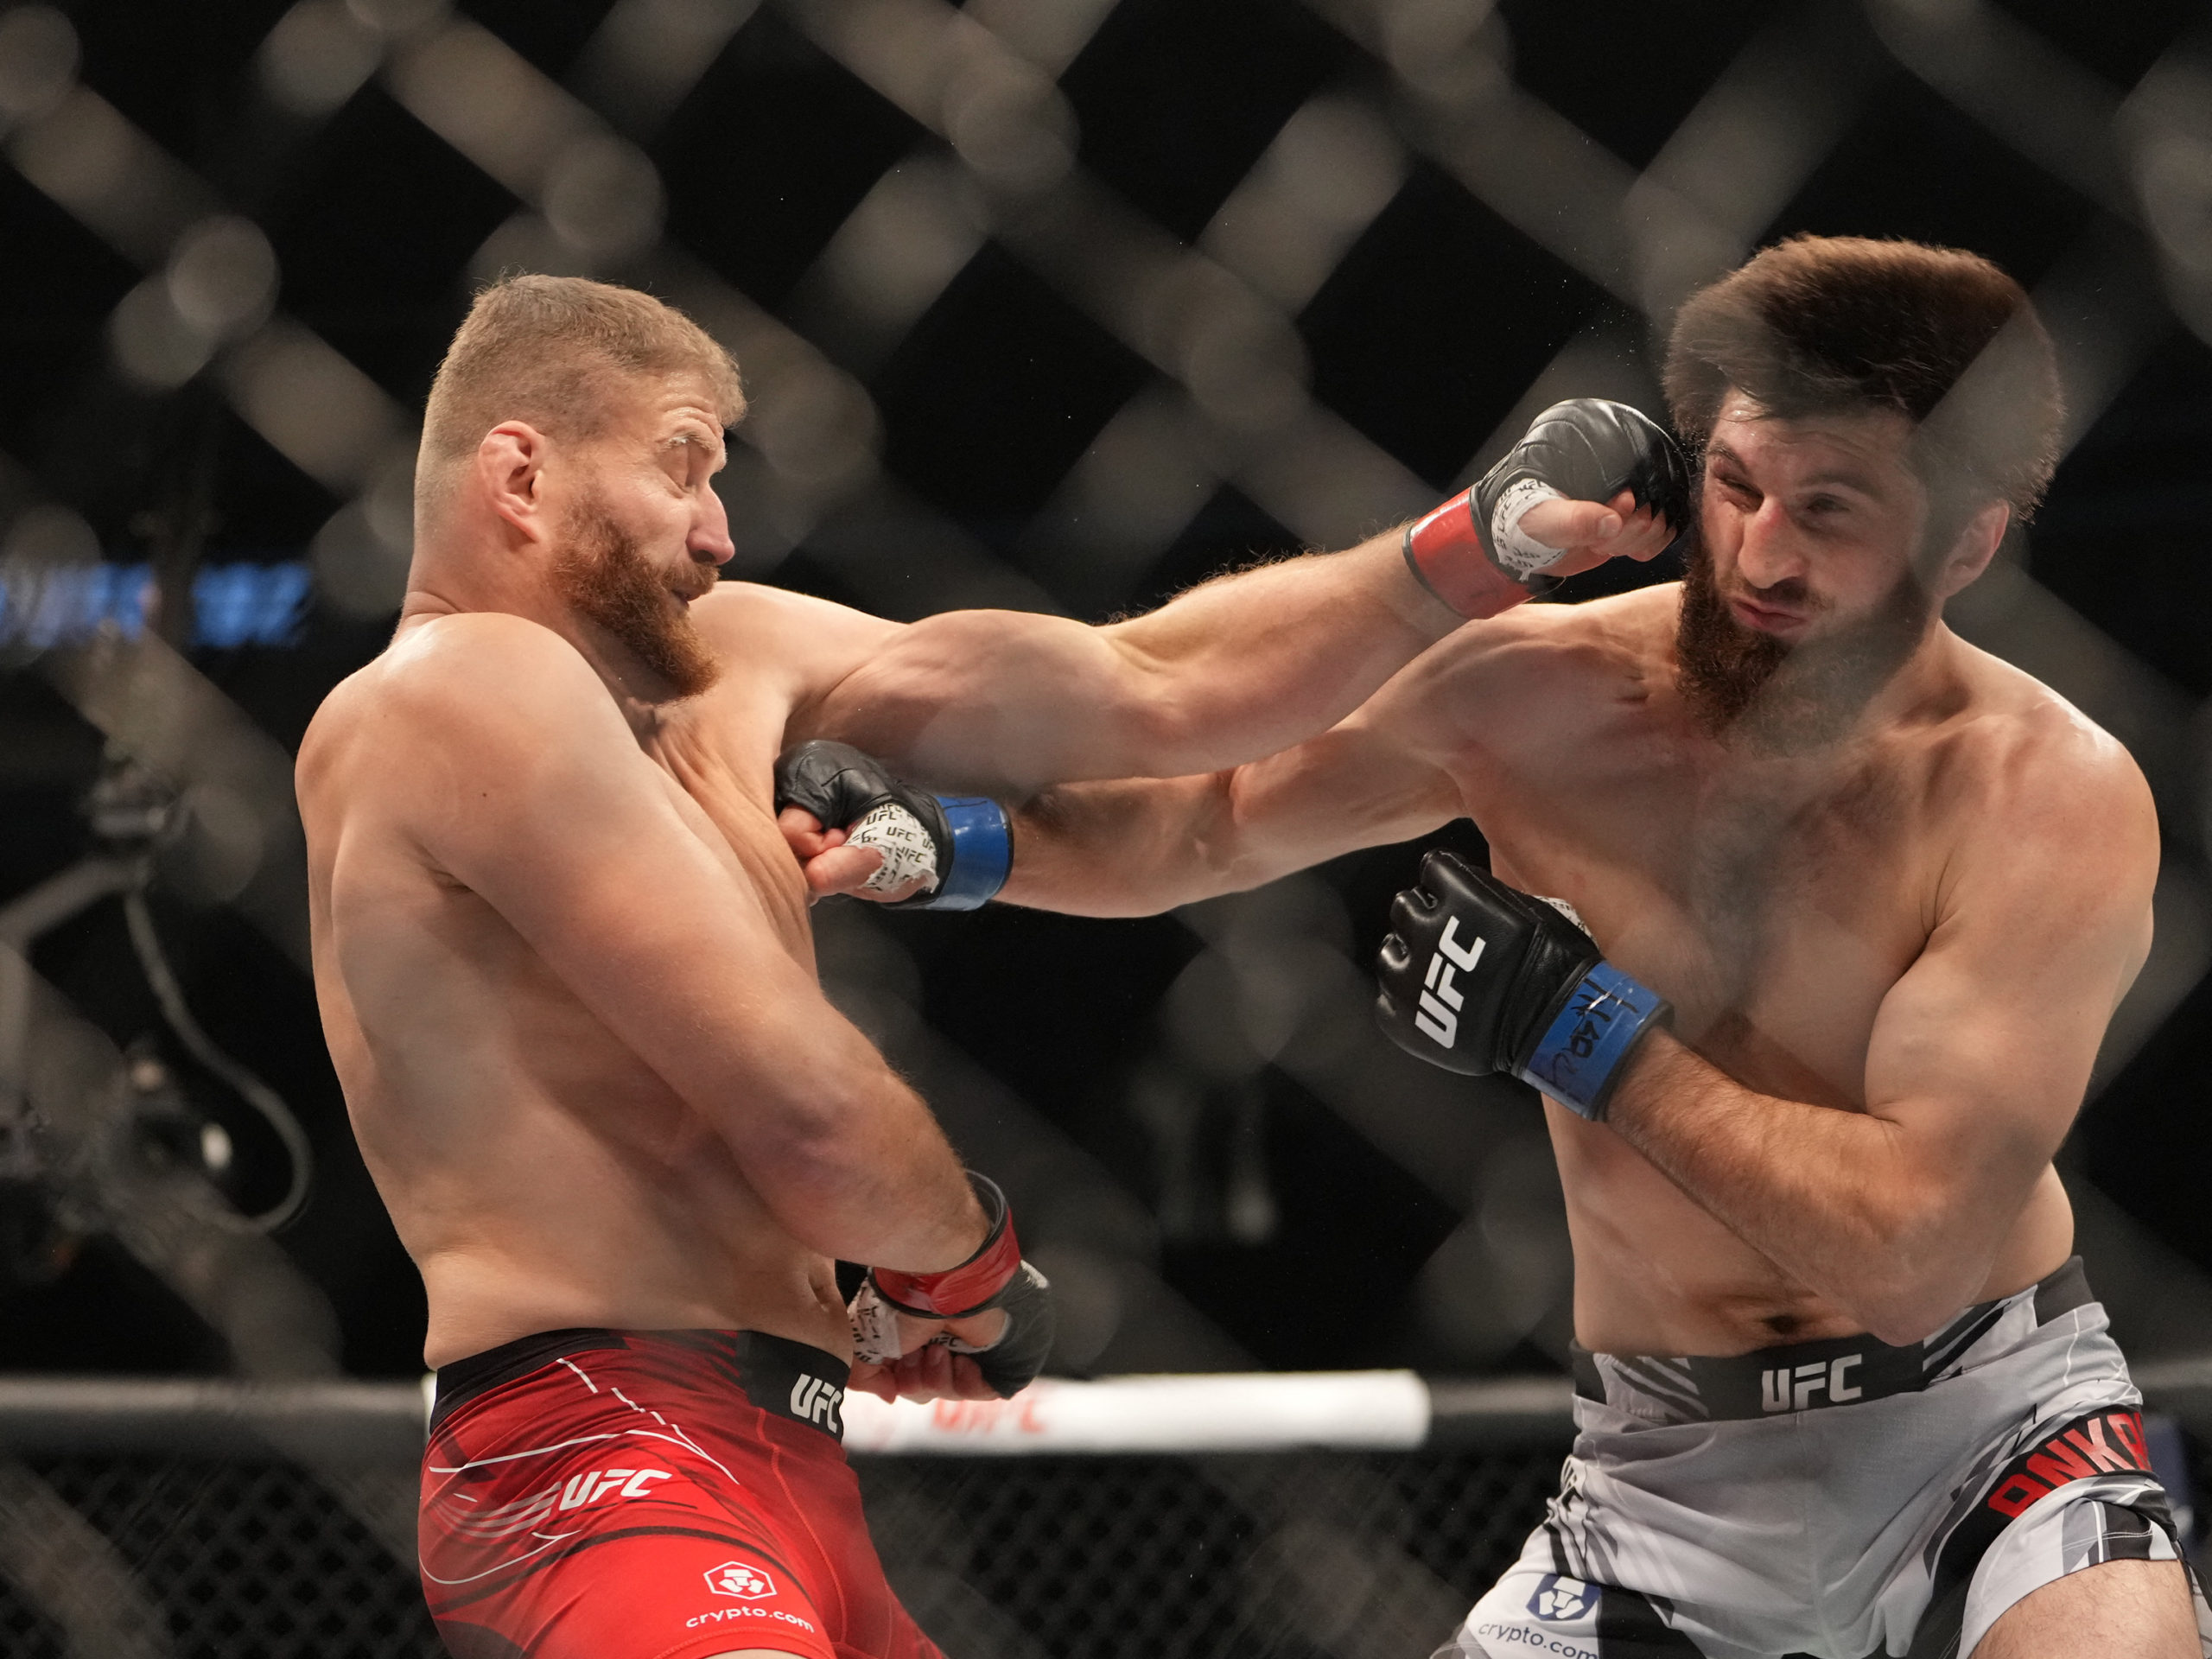  Jan Blachowicz (red gloves) fights Magomed Ankalaev (blue gloves) during UFC 282 at T-Mobile Arena.